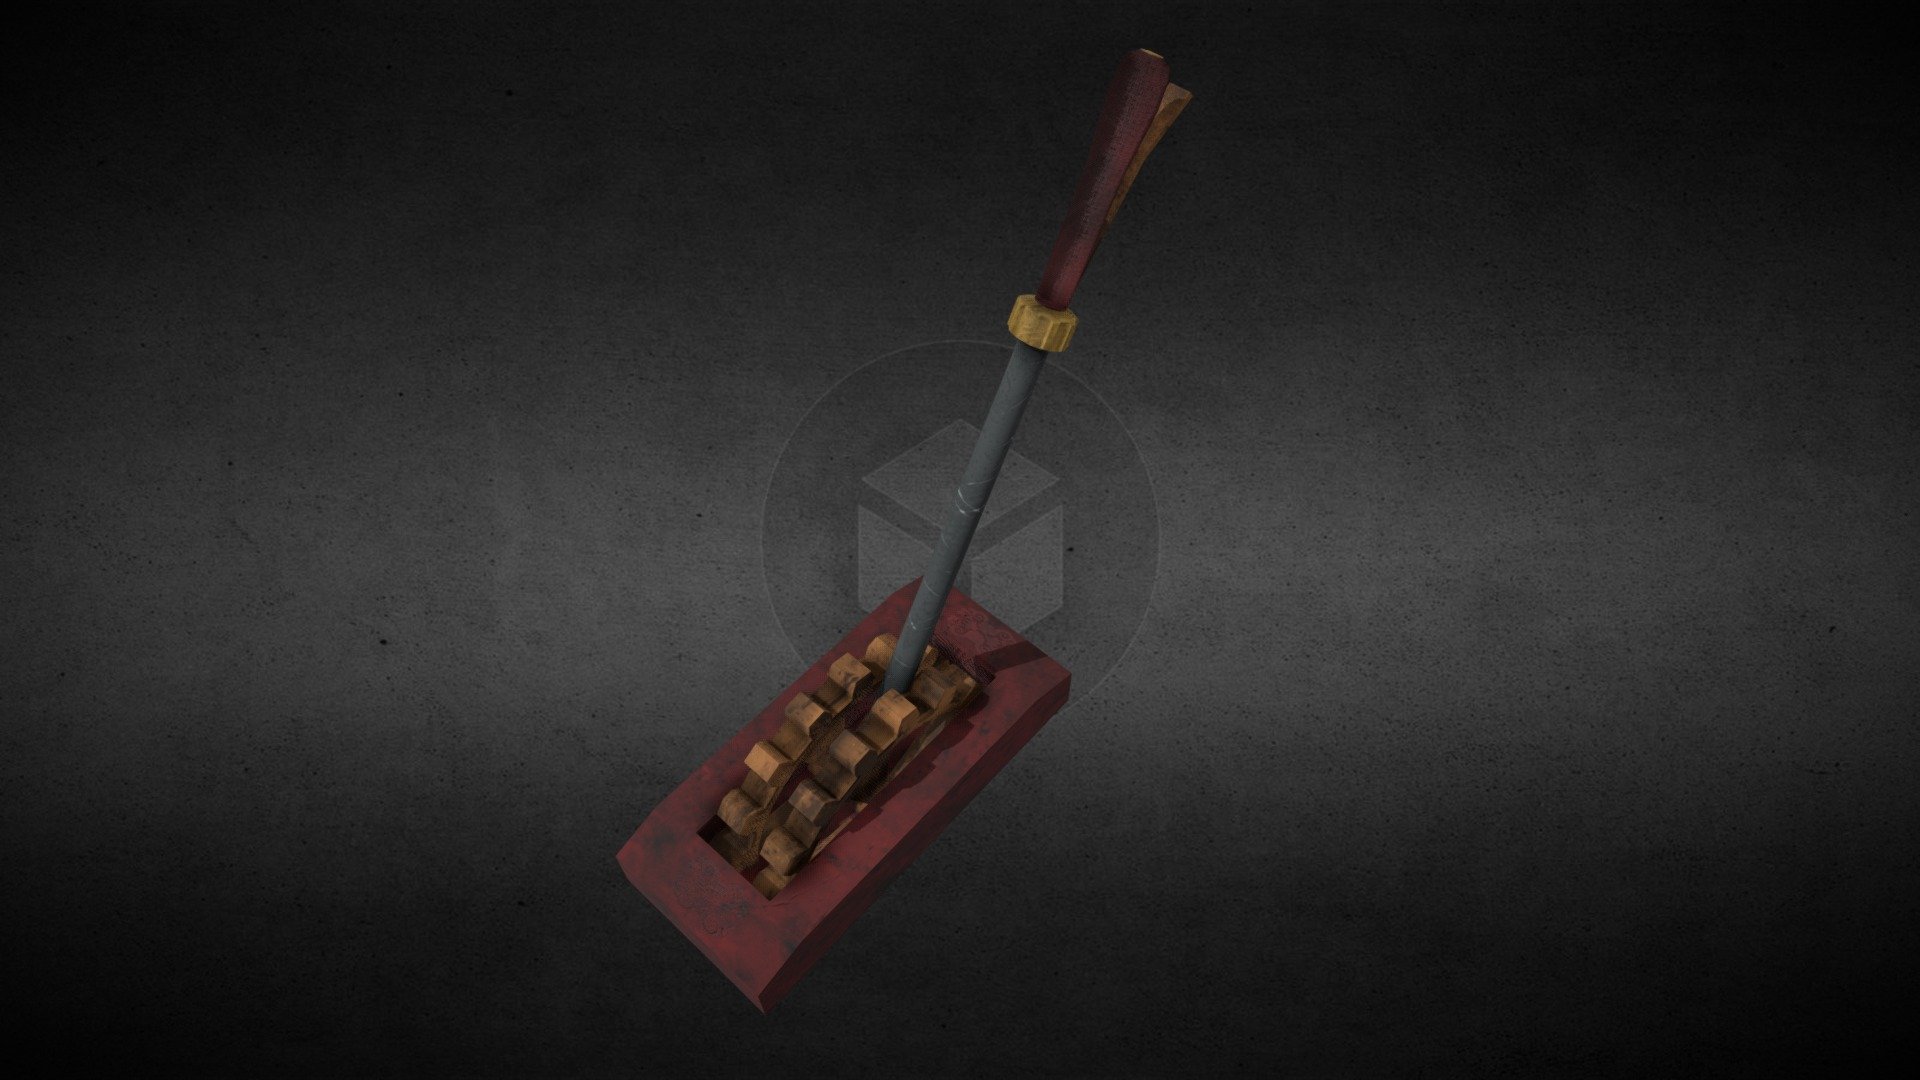 A low poly steampunk lever that I made for the game Gearscension.

Made with 3DS Max and Substance Painter 3d model